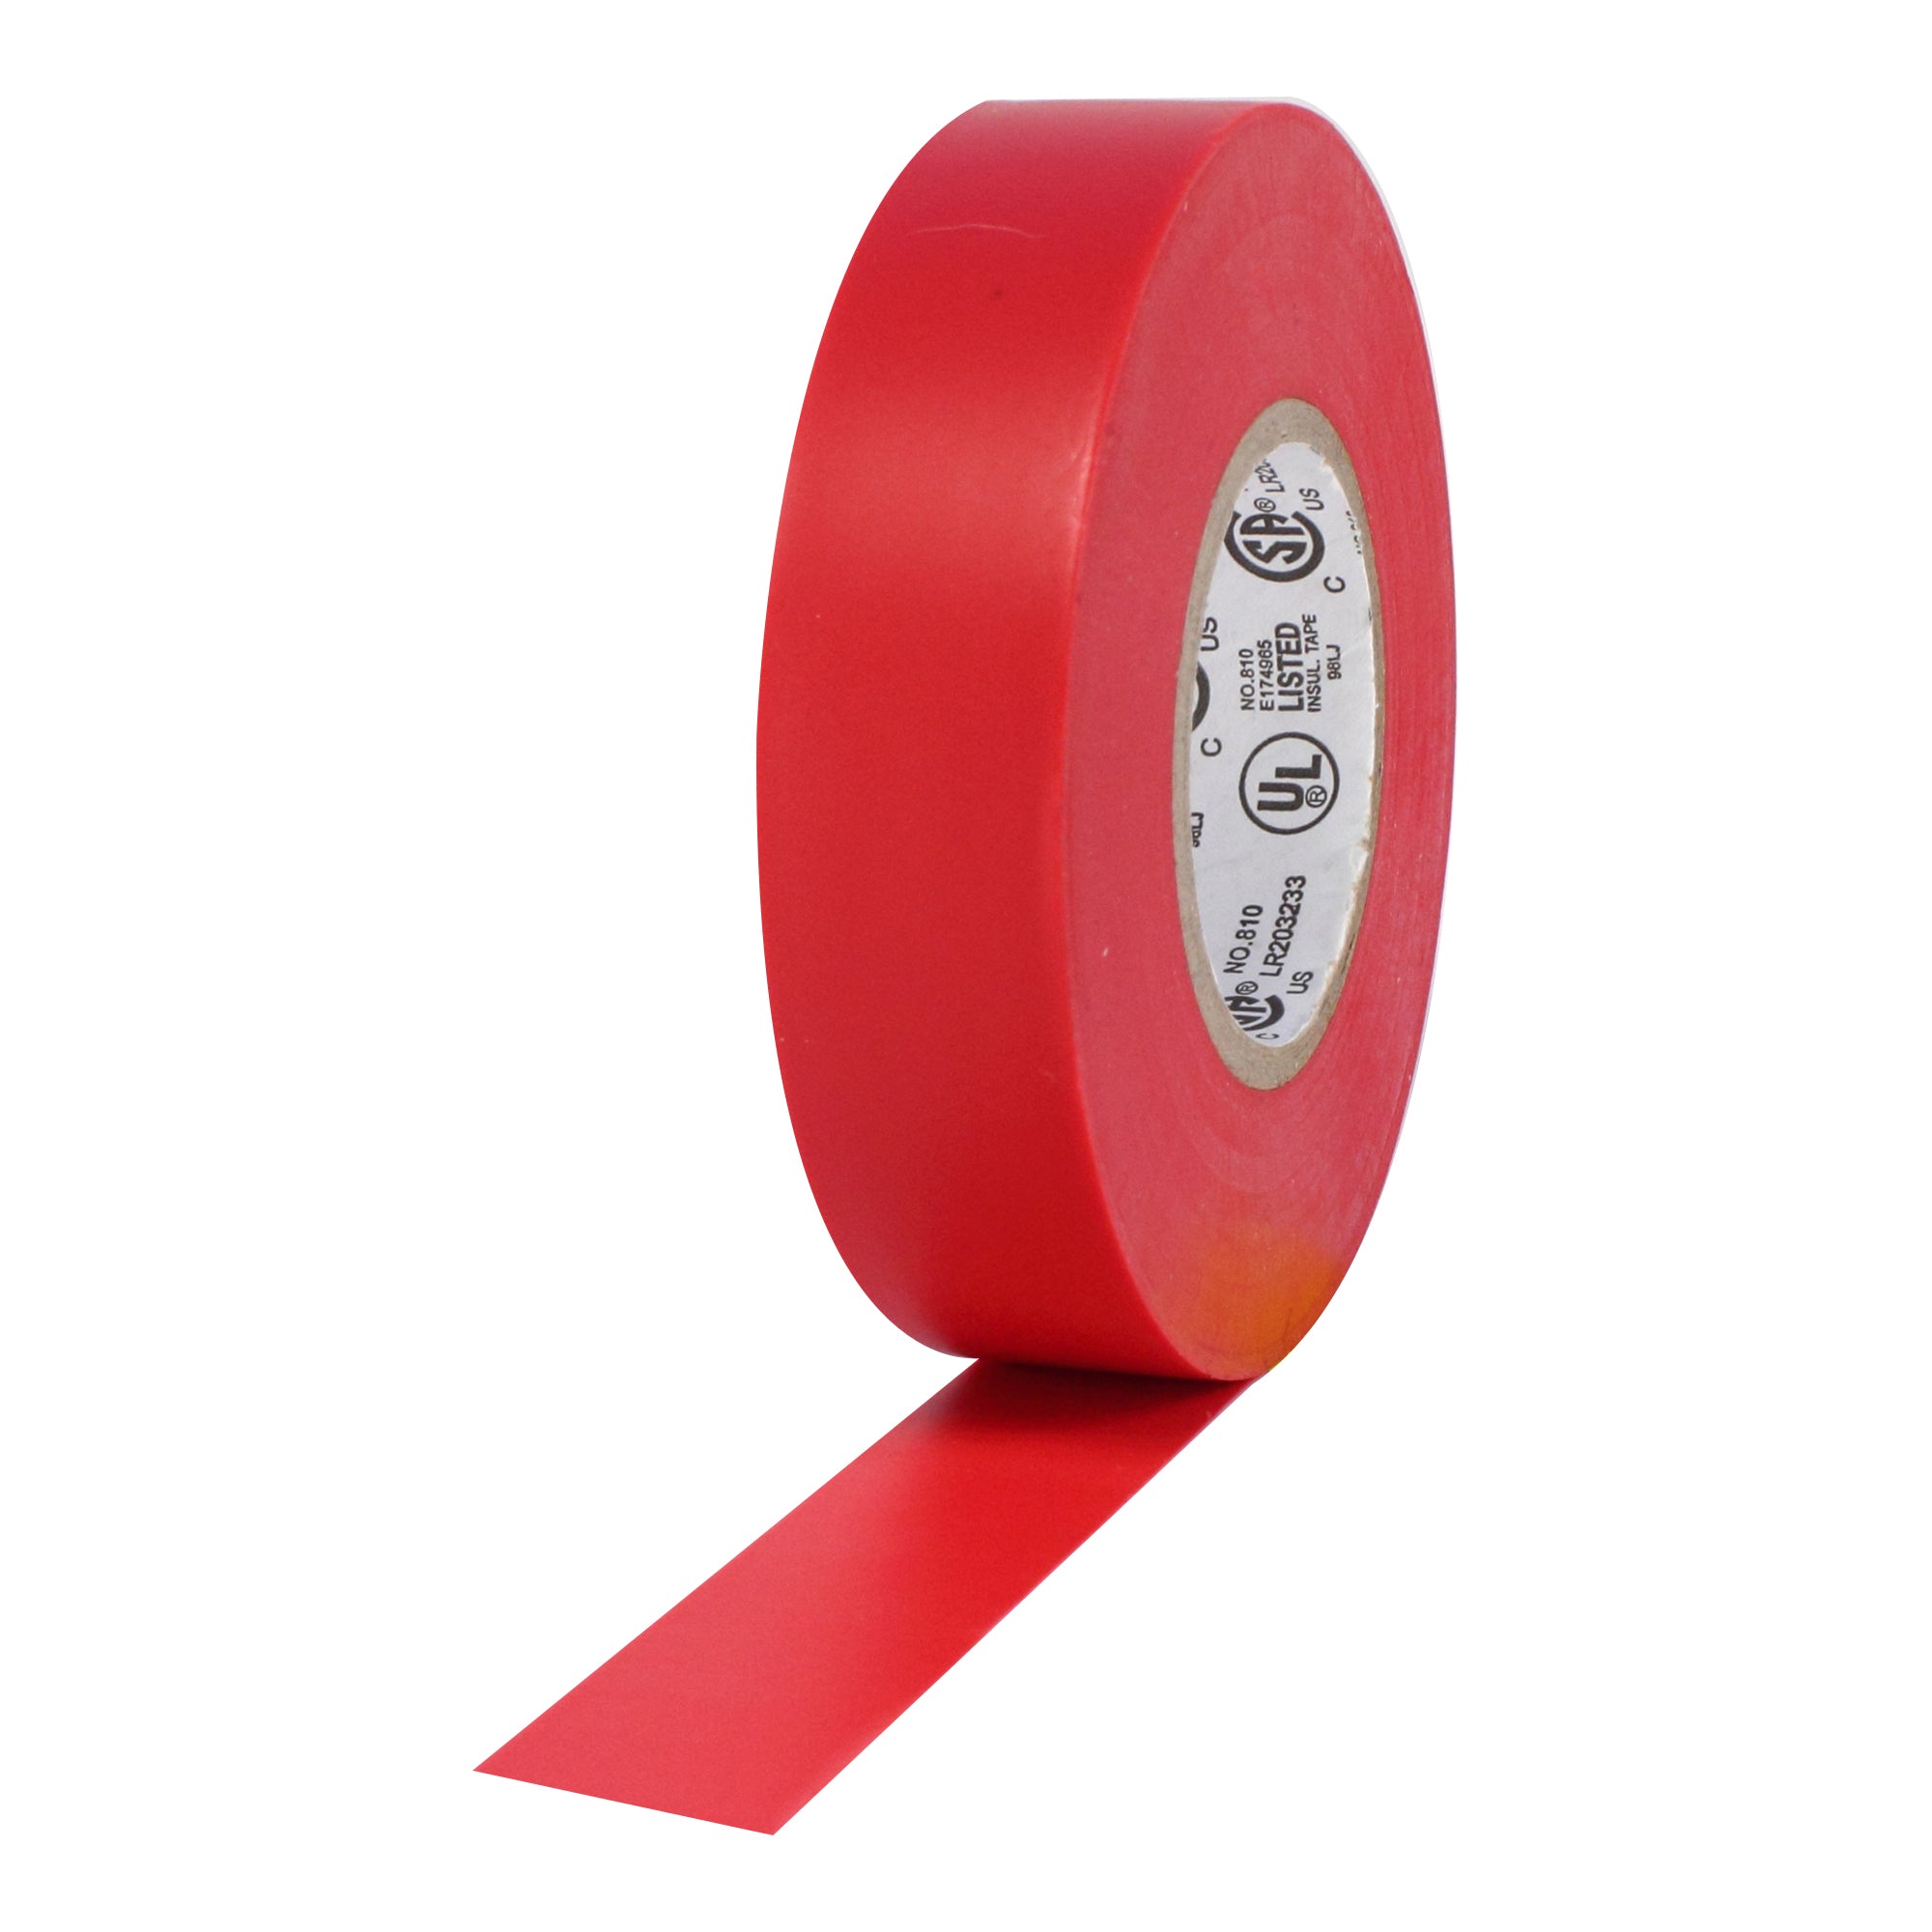 Pro Tapes Pro Plus Electrical Tape - 3/4" x 60', Red